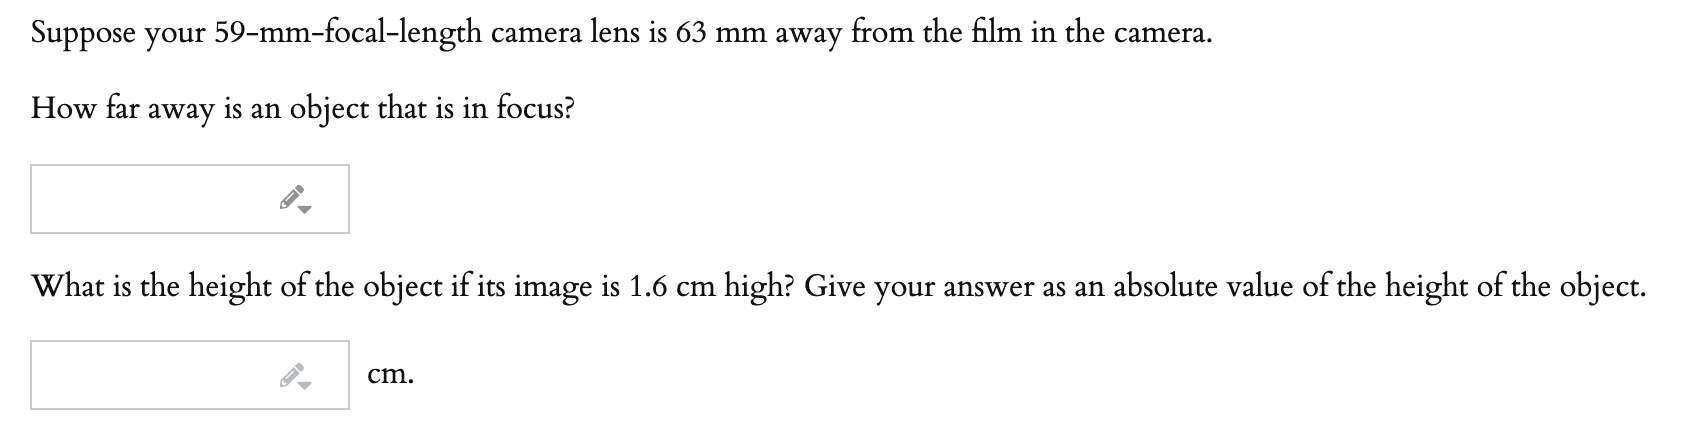 Suppose your 59-mm-focal-length camera lens is 63 mm away from the film in the camera.
How far away is an object that is in focus?
What is the height of the object if its image is 1.6 cm high? Give your answer as an absolute value of the height of the object.
cm.
